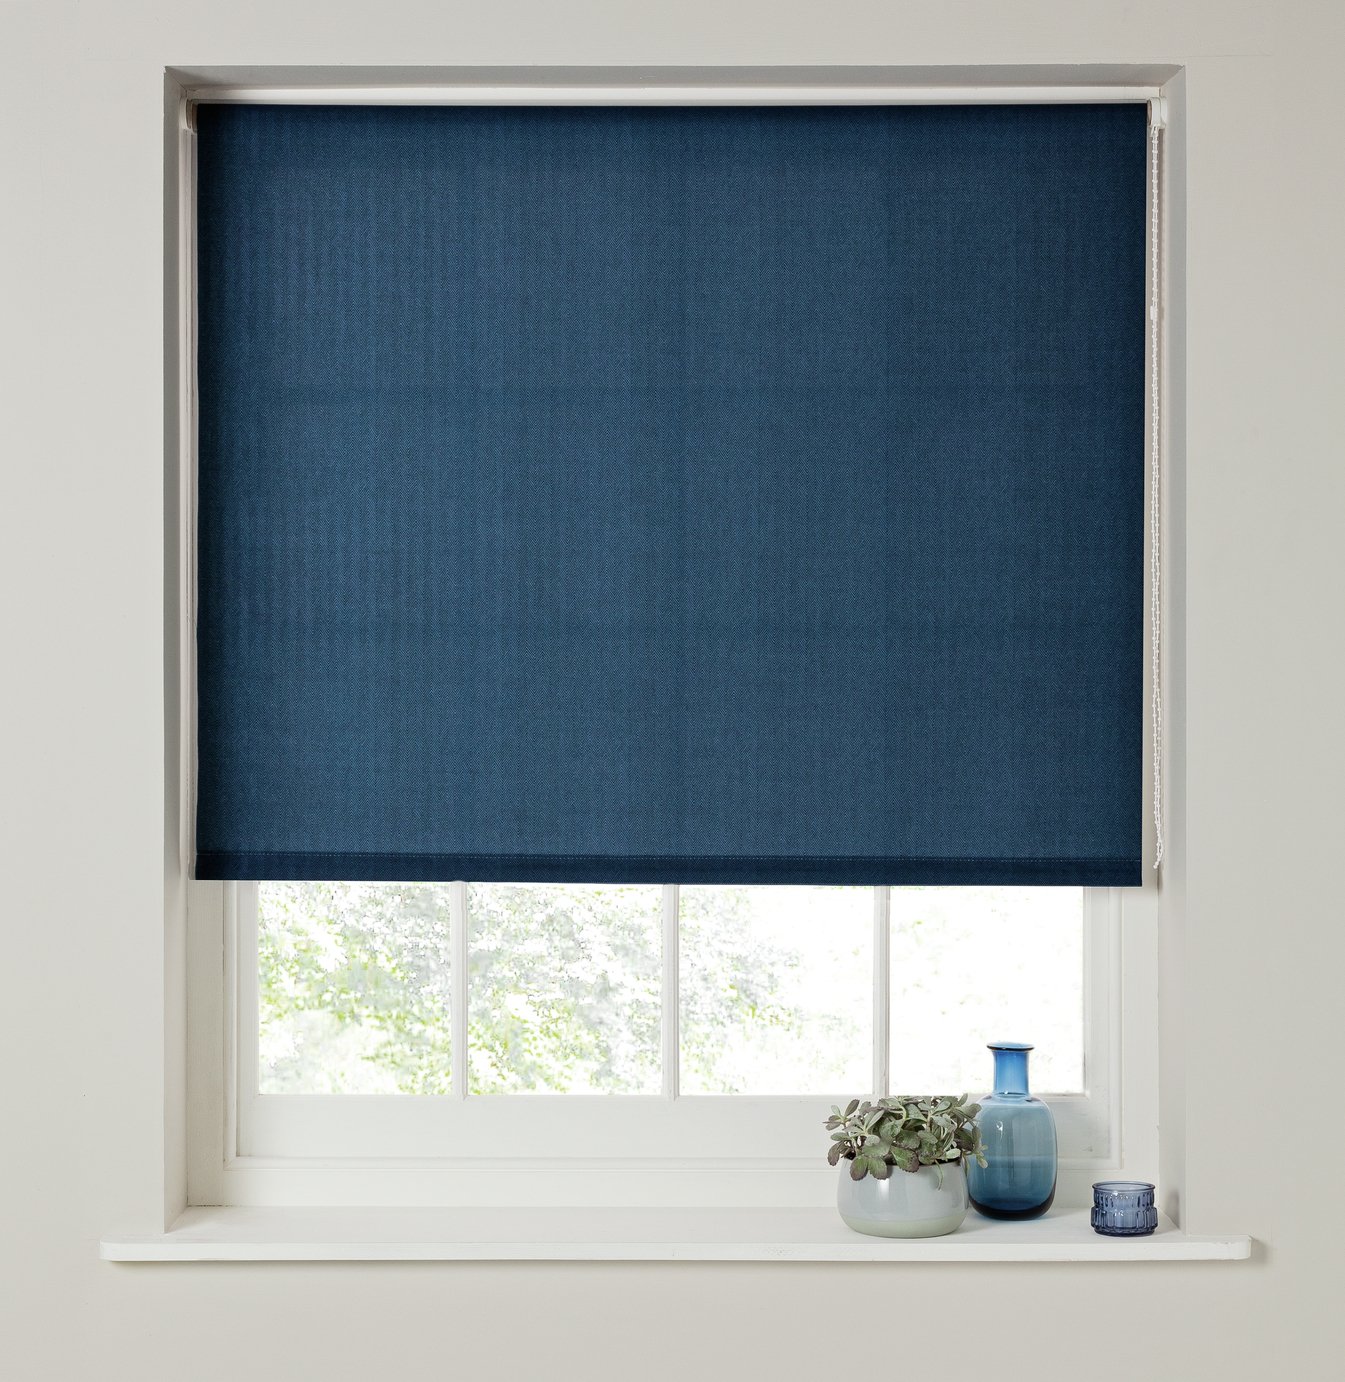 Argos Home Twill Blackout Roller Blind review